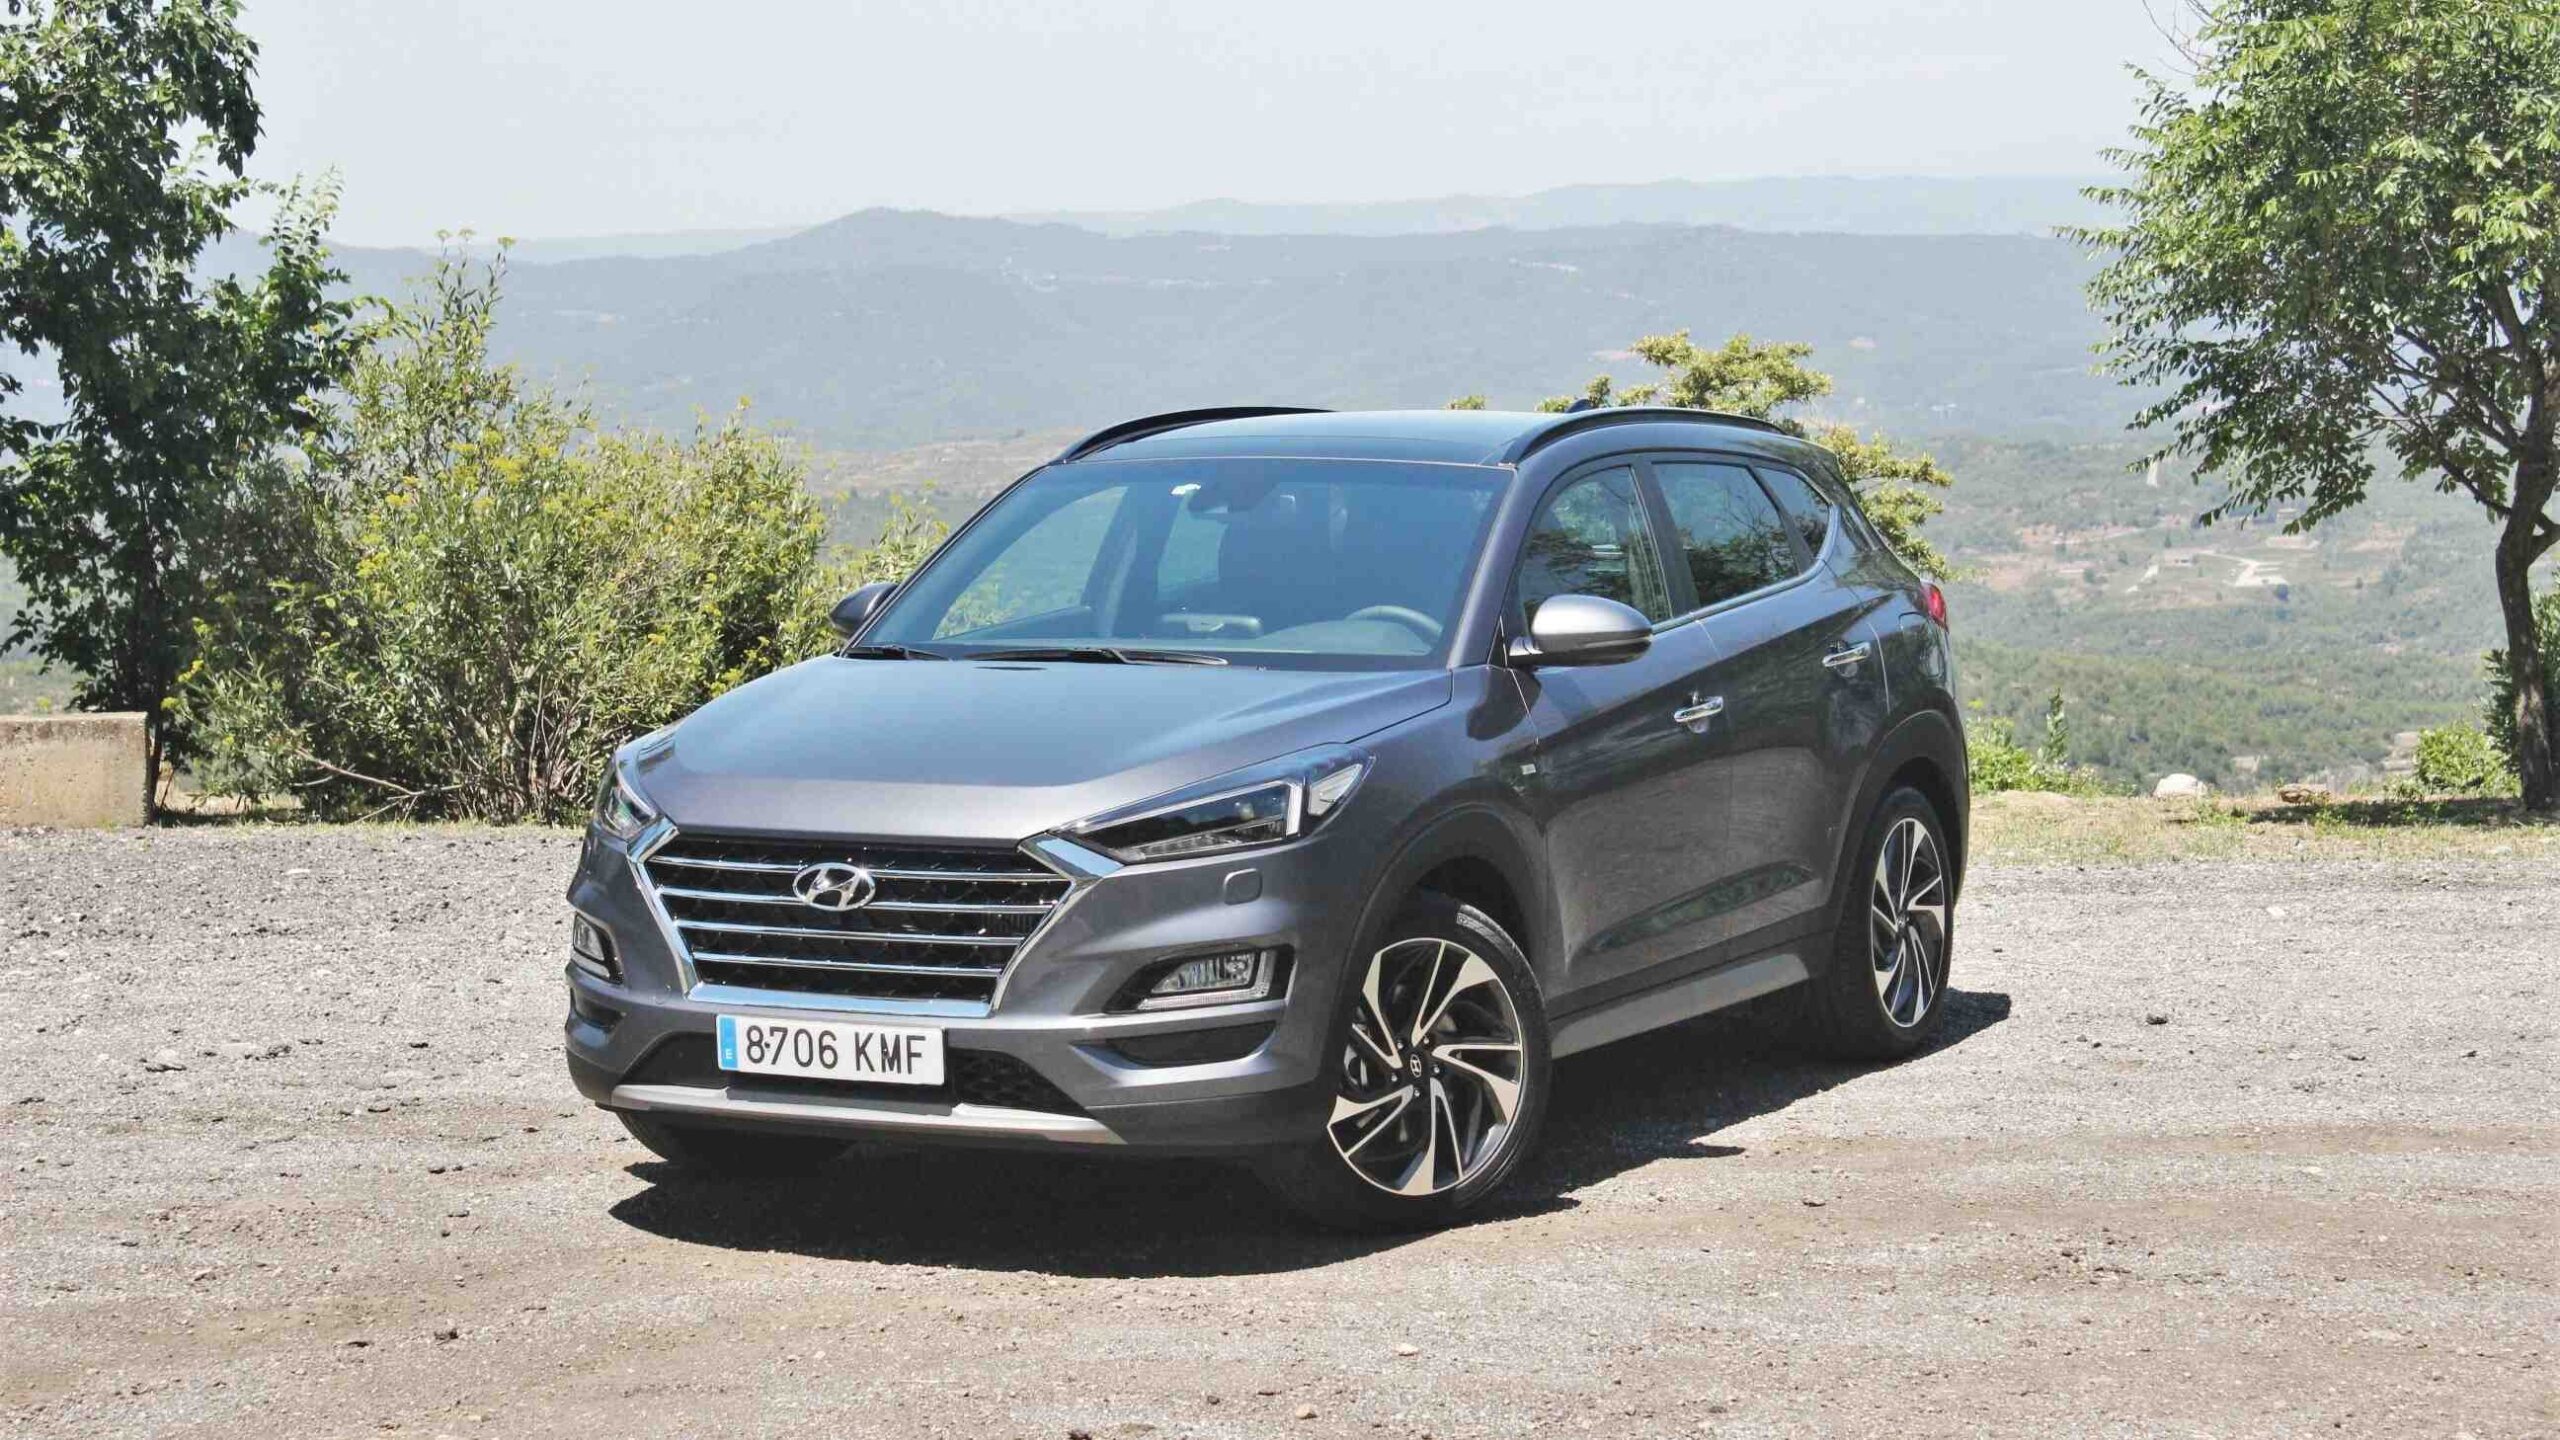 Comment Dit-on Hyundai ?